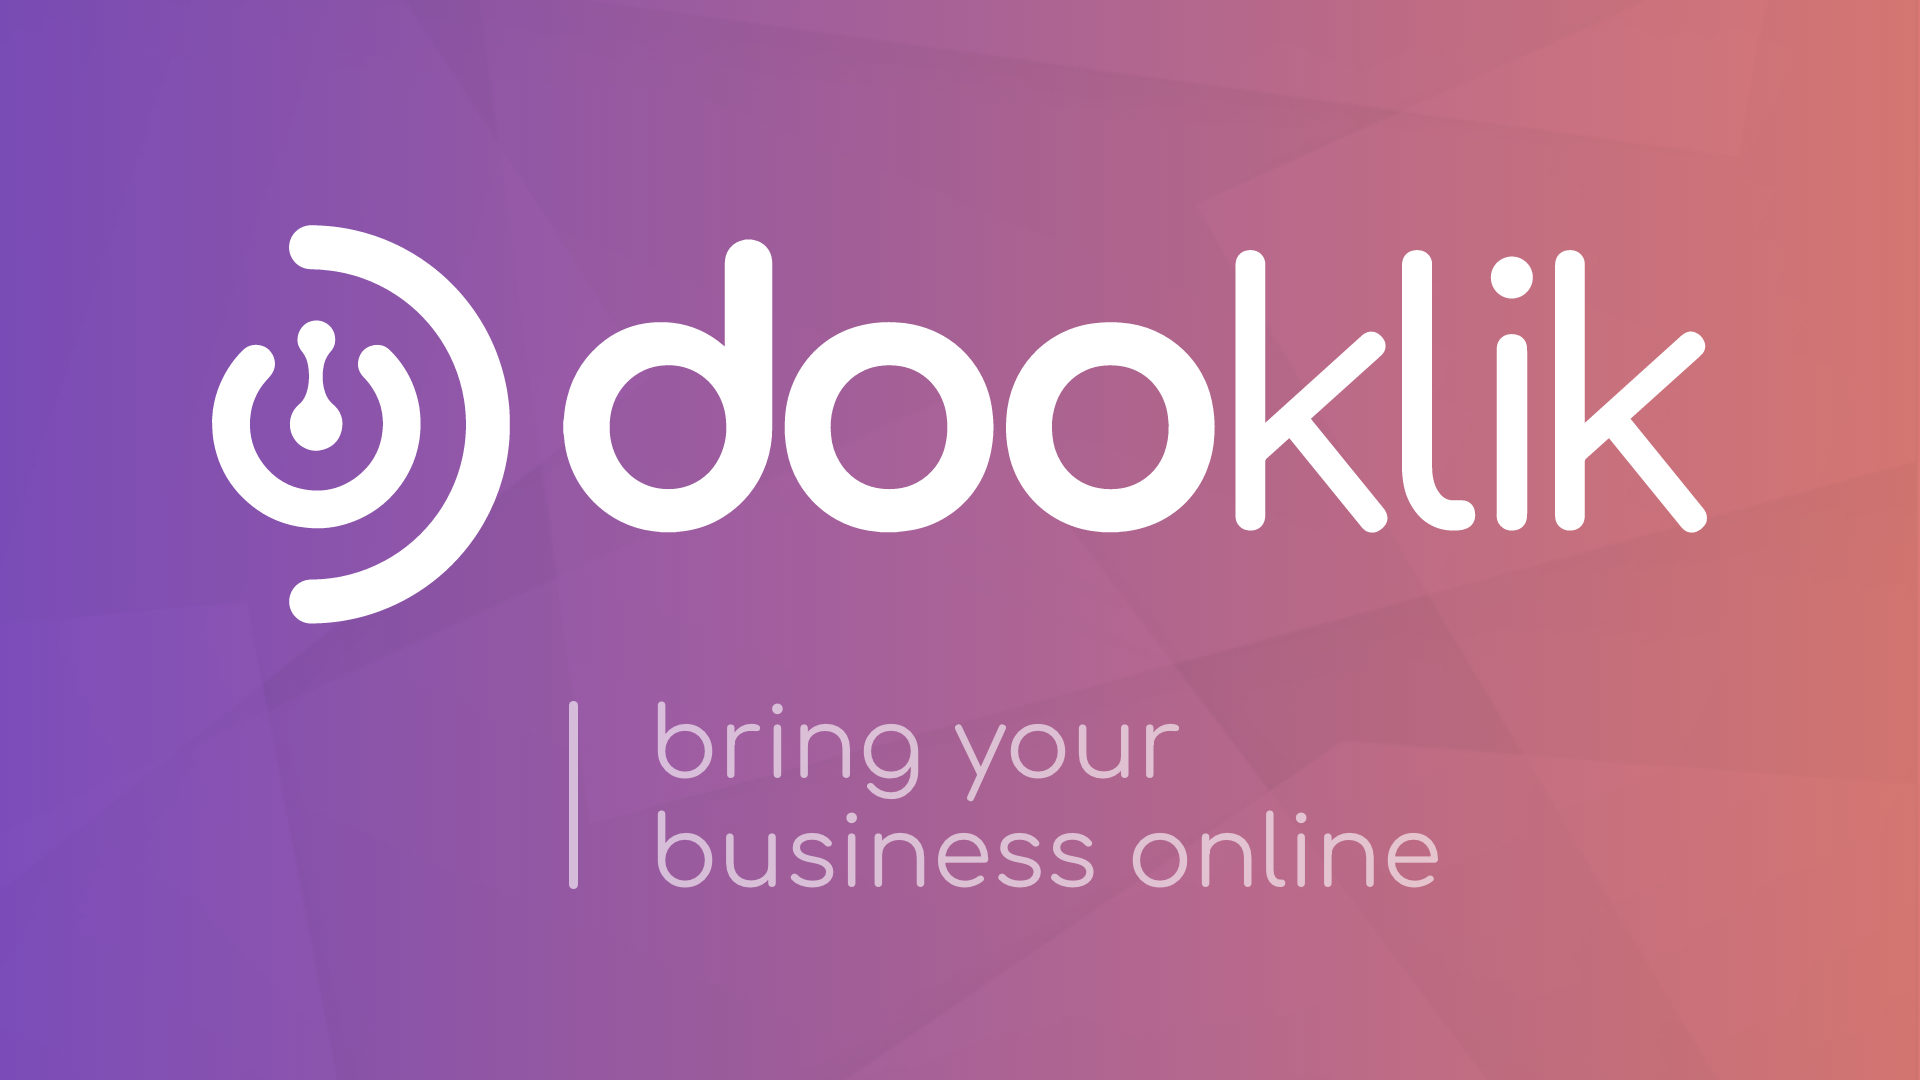 Can I use my own domain name with dooklik?